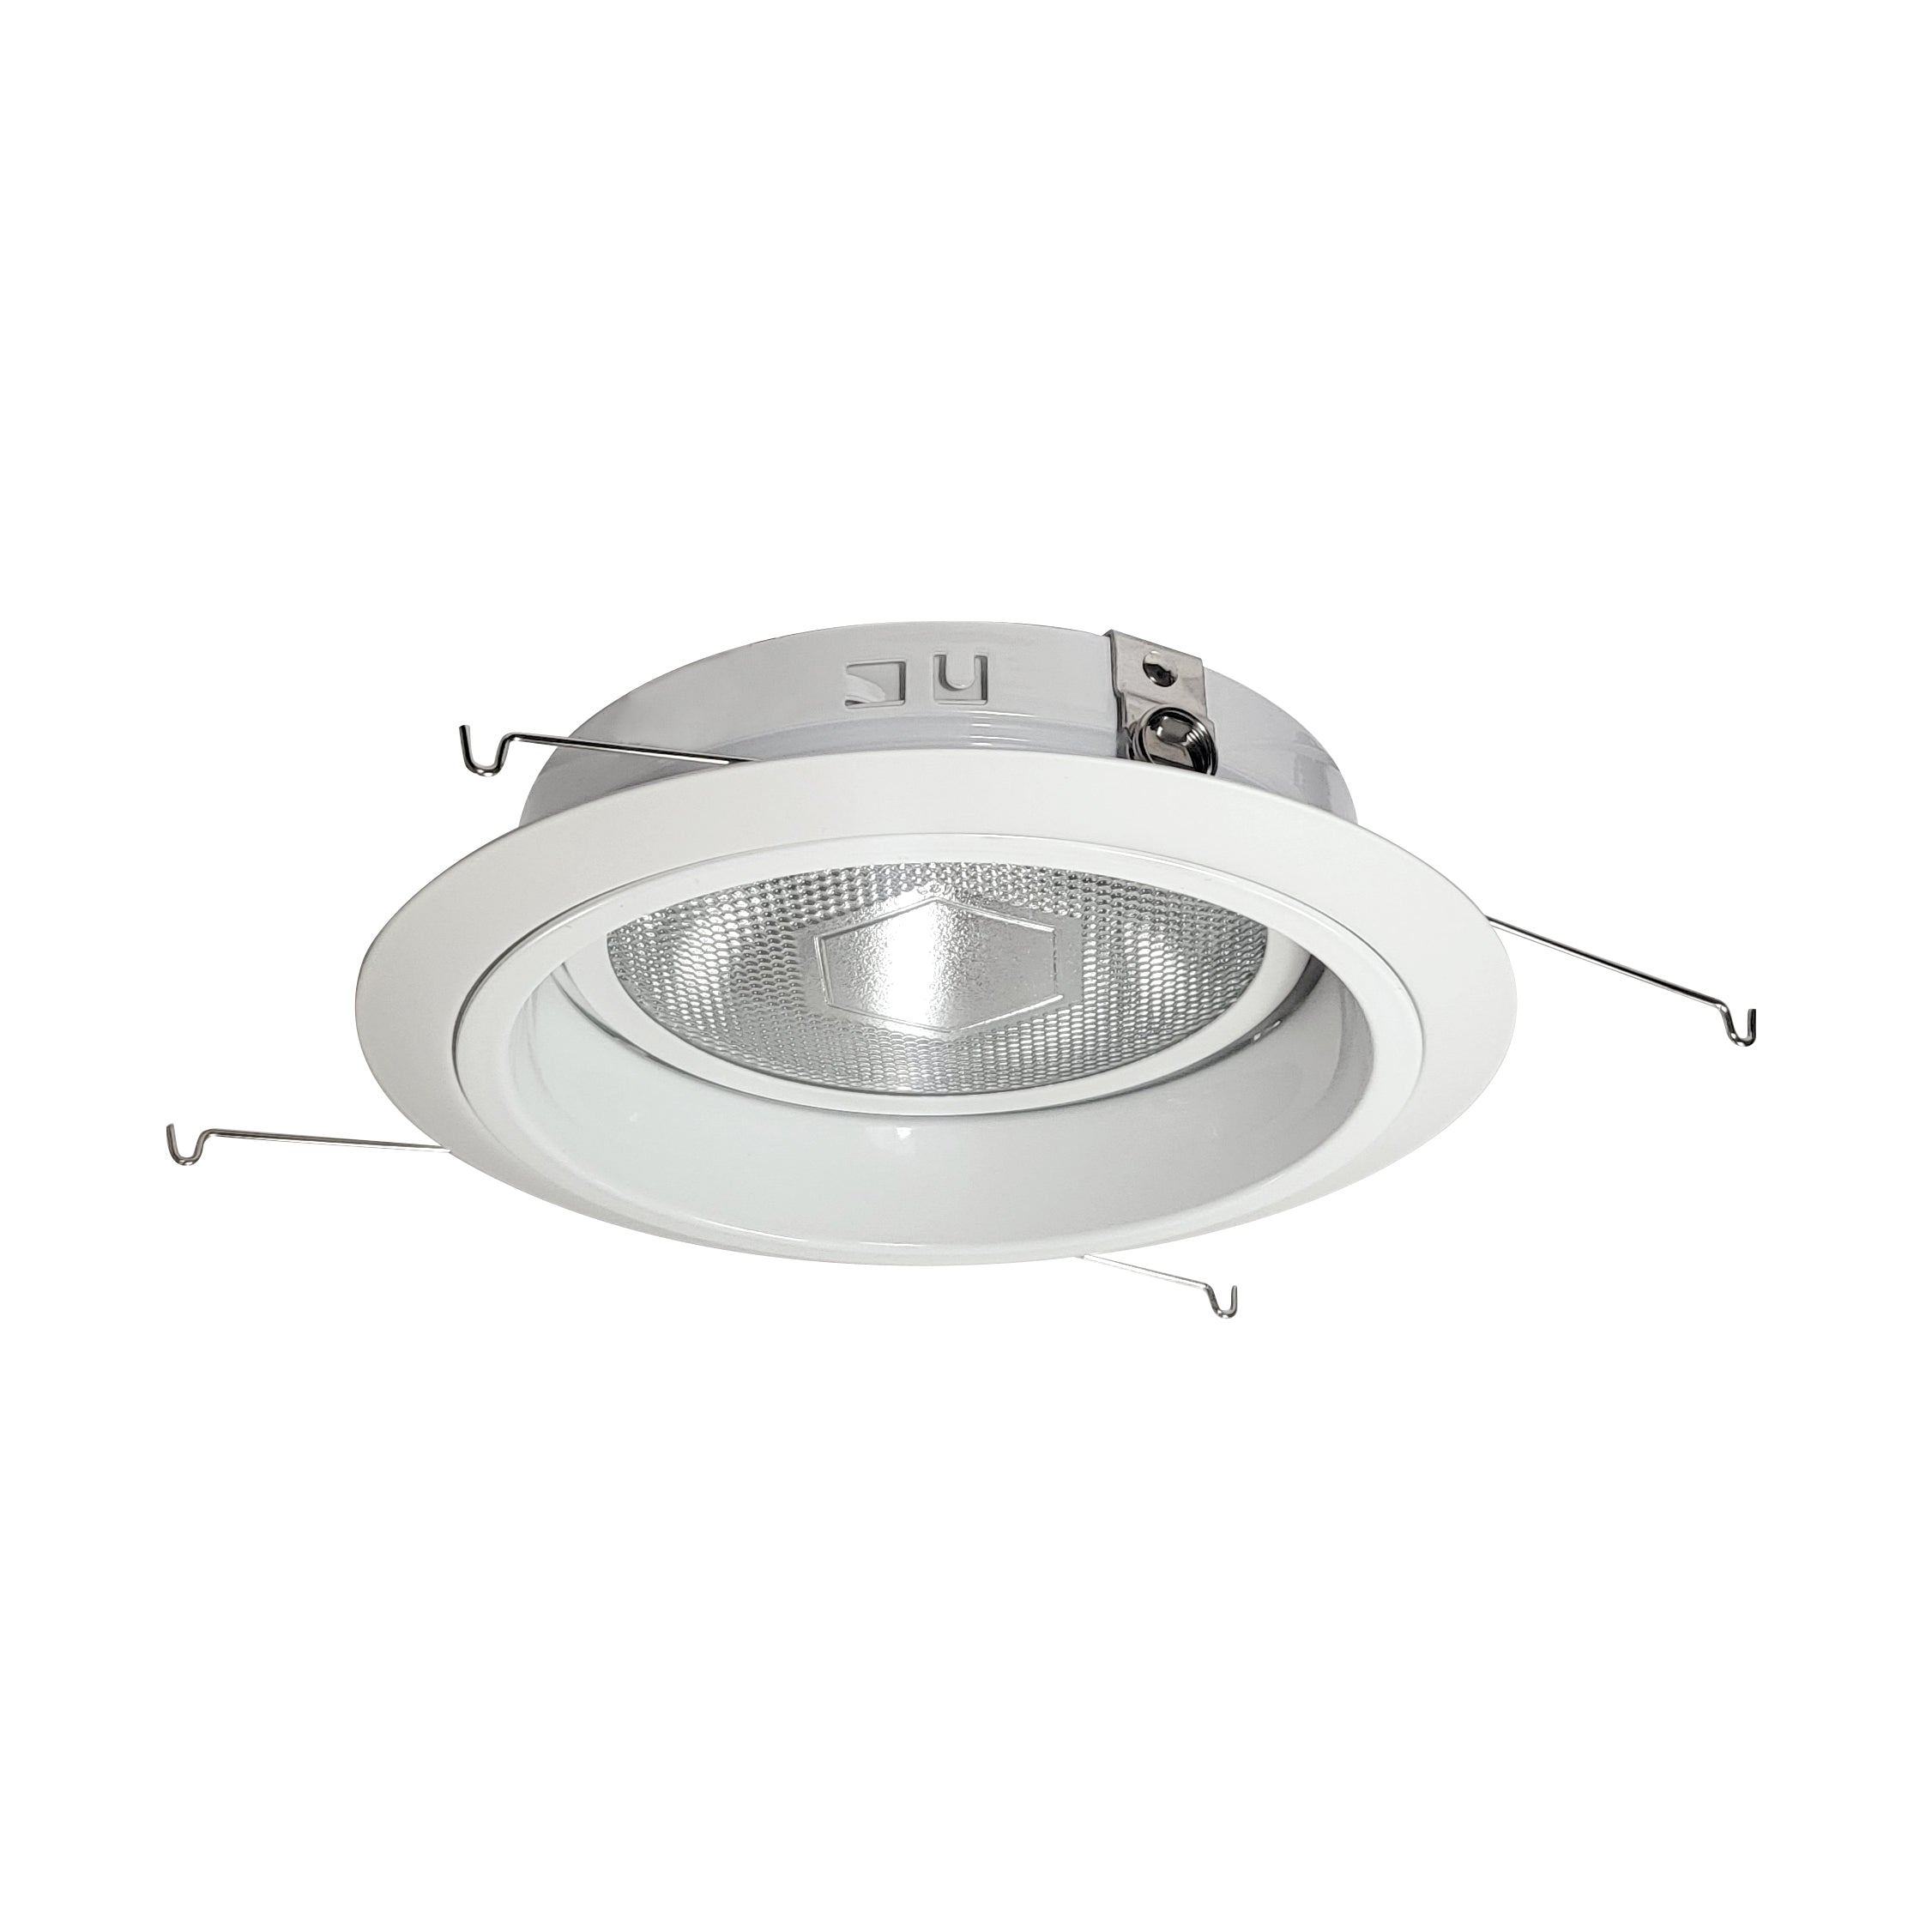 Nora Lighting NTM-57W/M1 - Recessed - 6 Inch PAR38 Specular Reflector w/ Rivet w/ Gimbal Ring, White